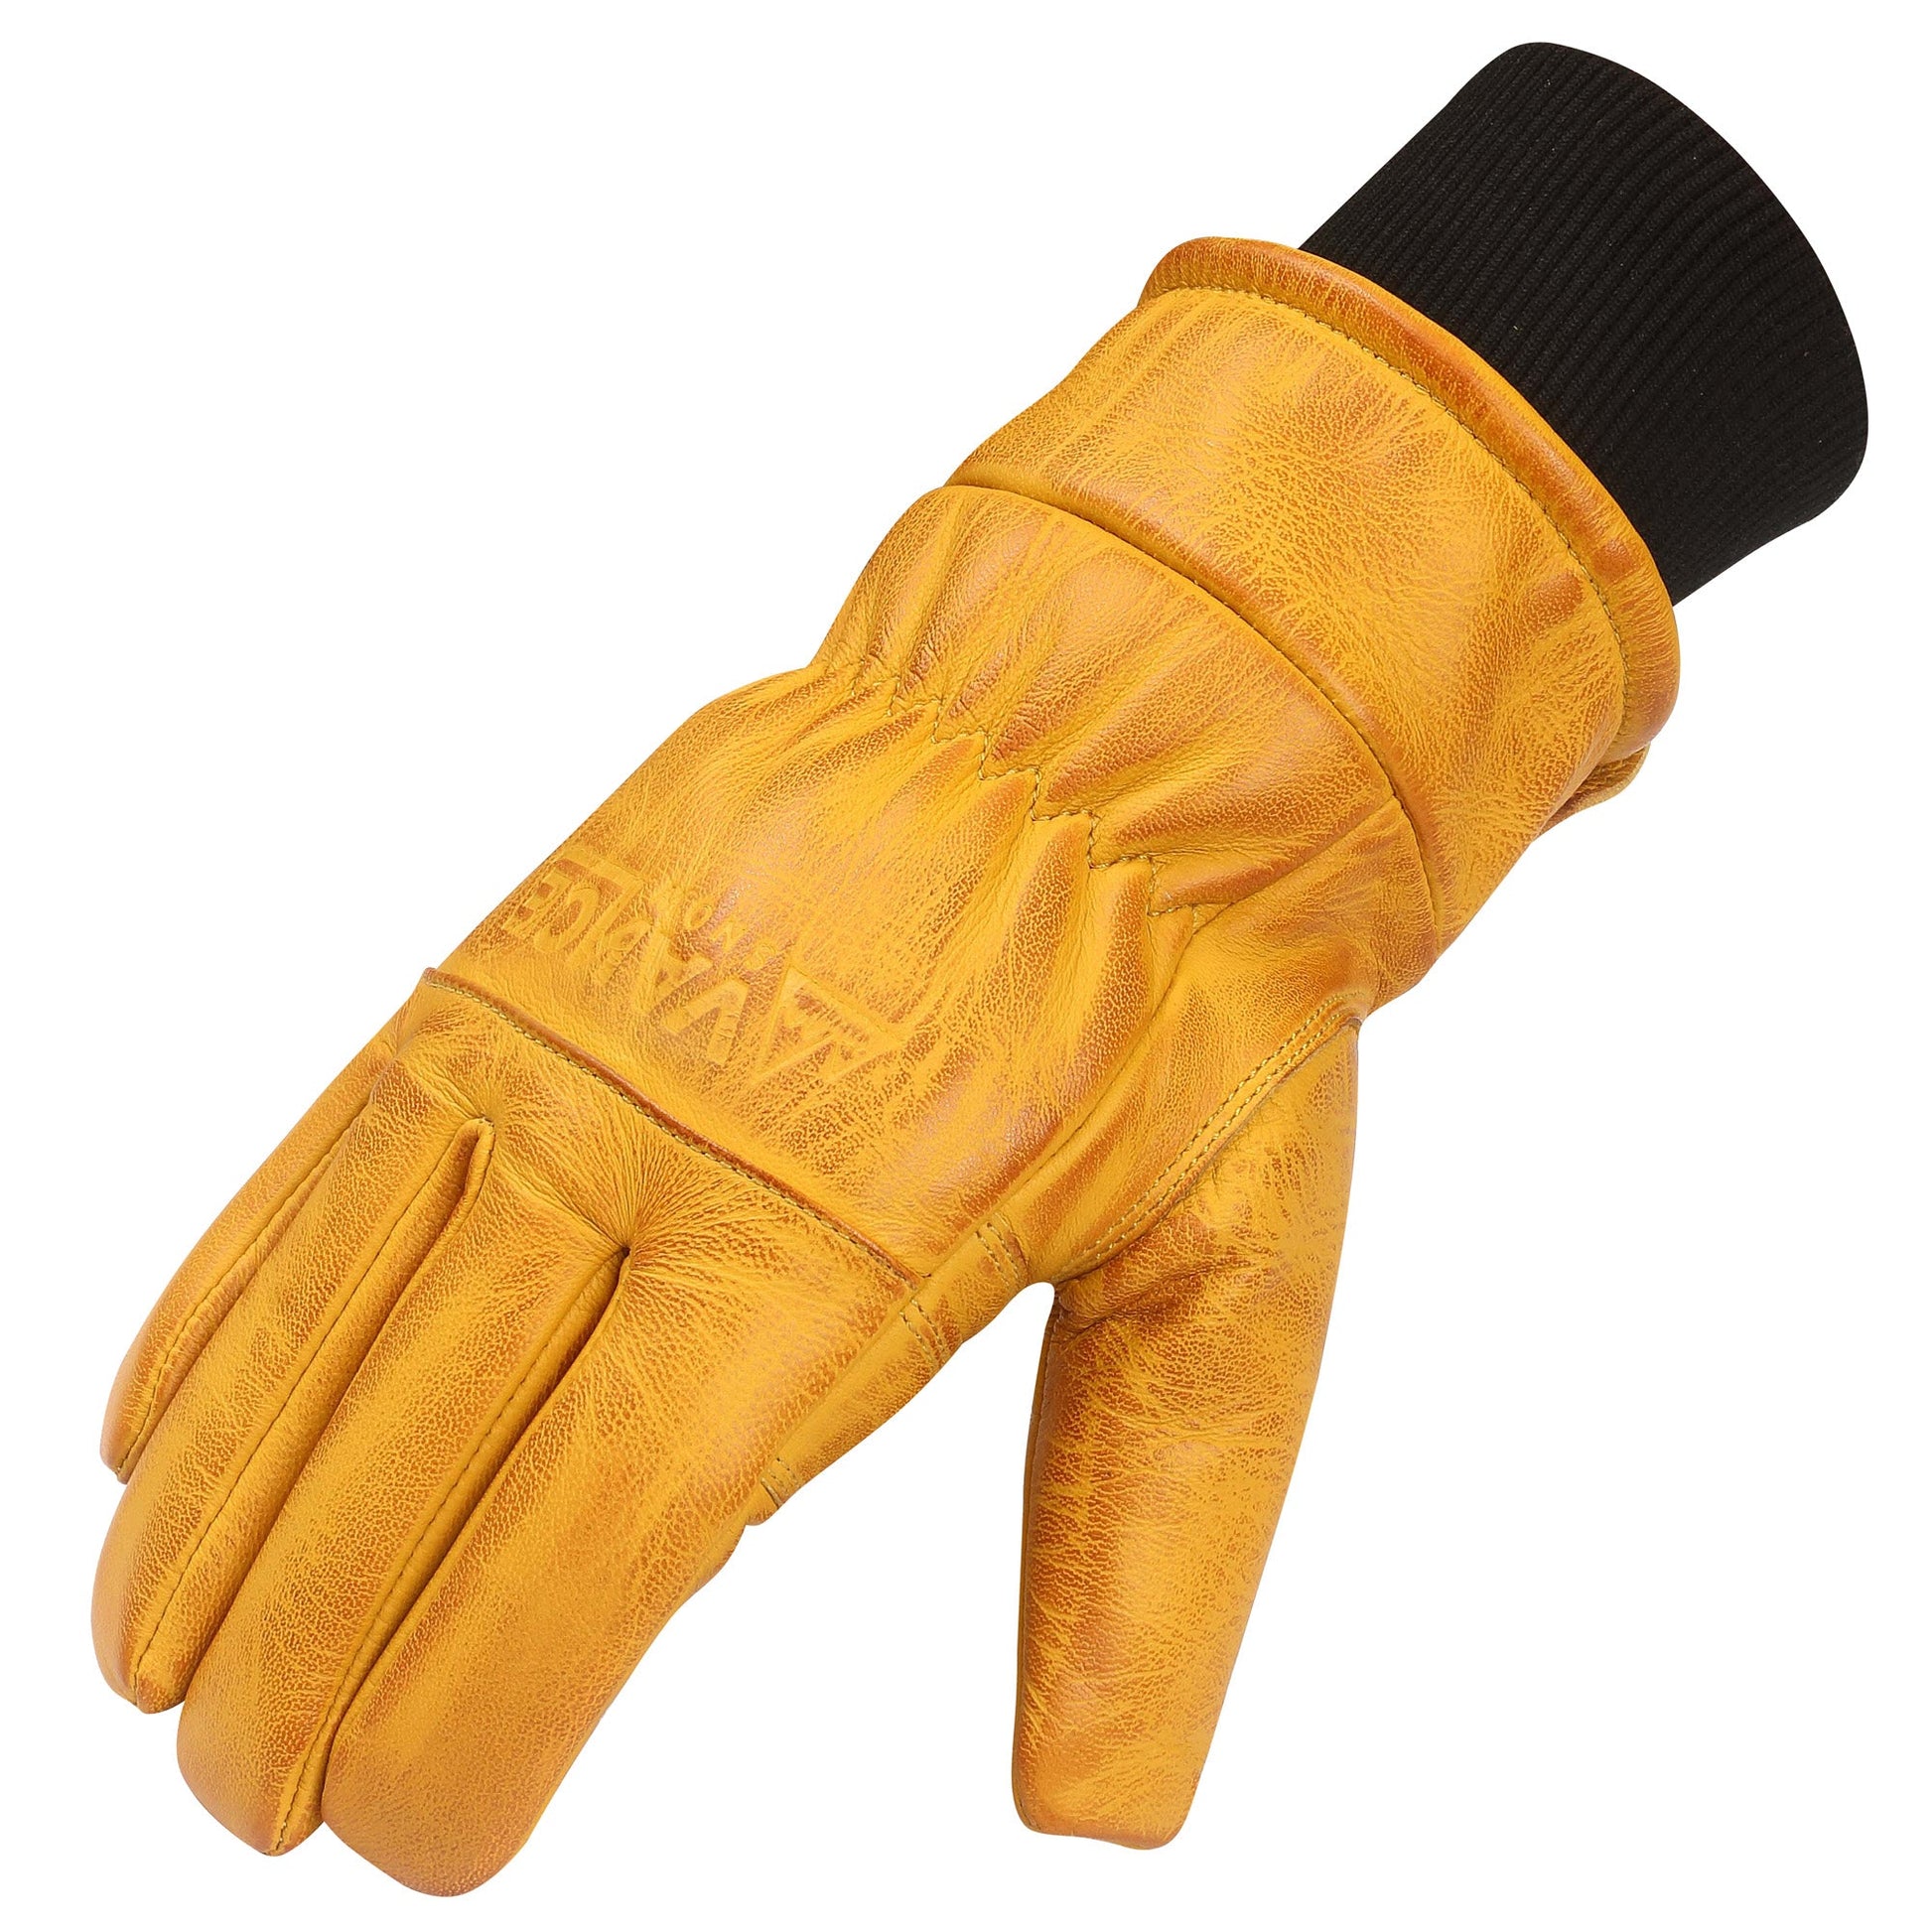 Vance Snow Mens Womens Unisex Goatskin Leather Insulated Winter Ski and Snowboard Gloves Tan Yellow Top Thumside